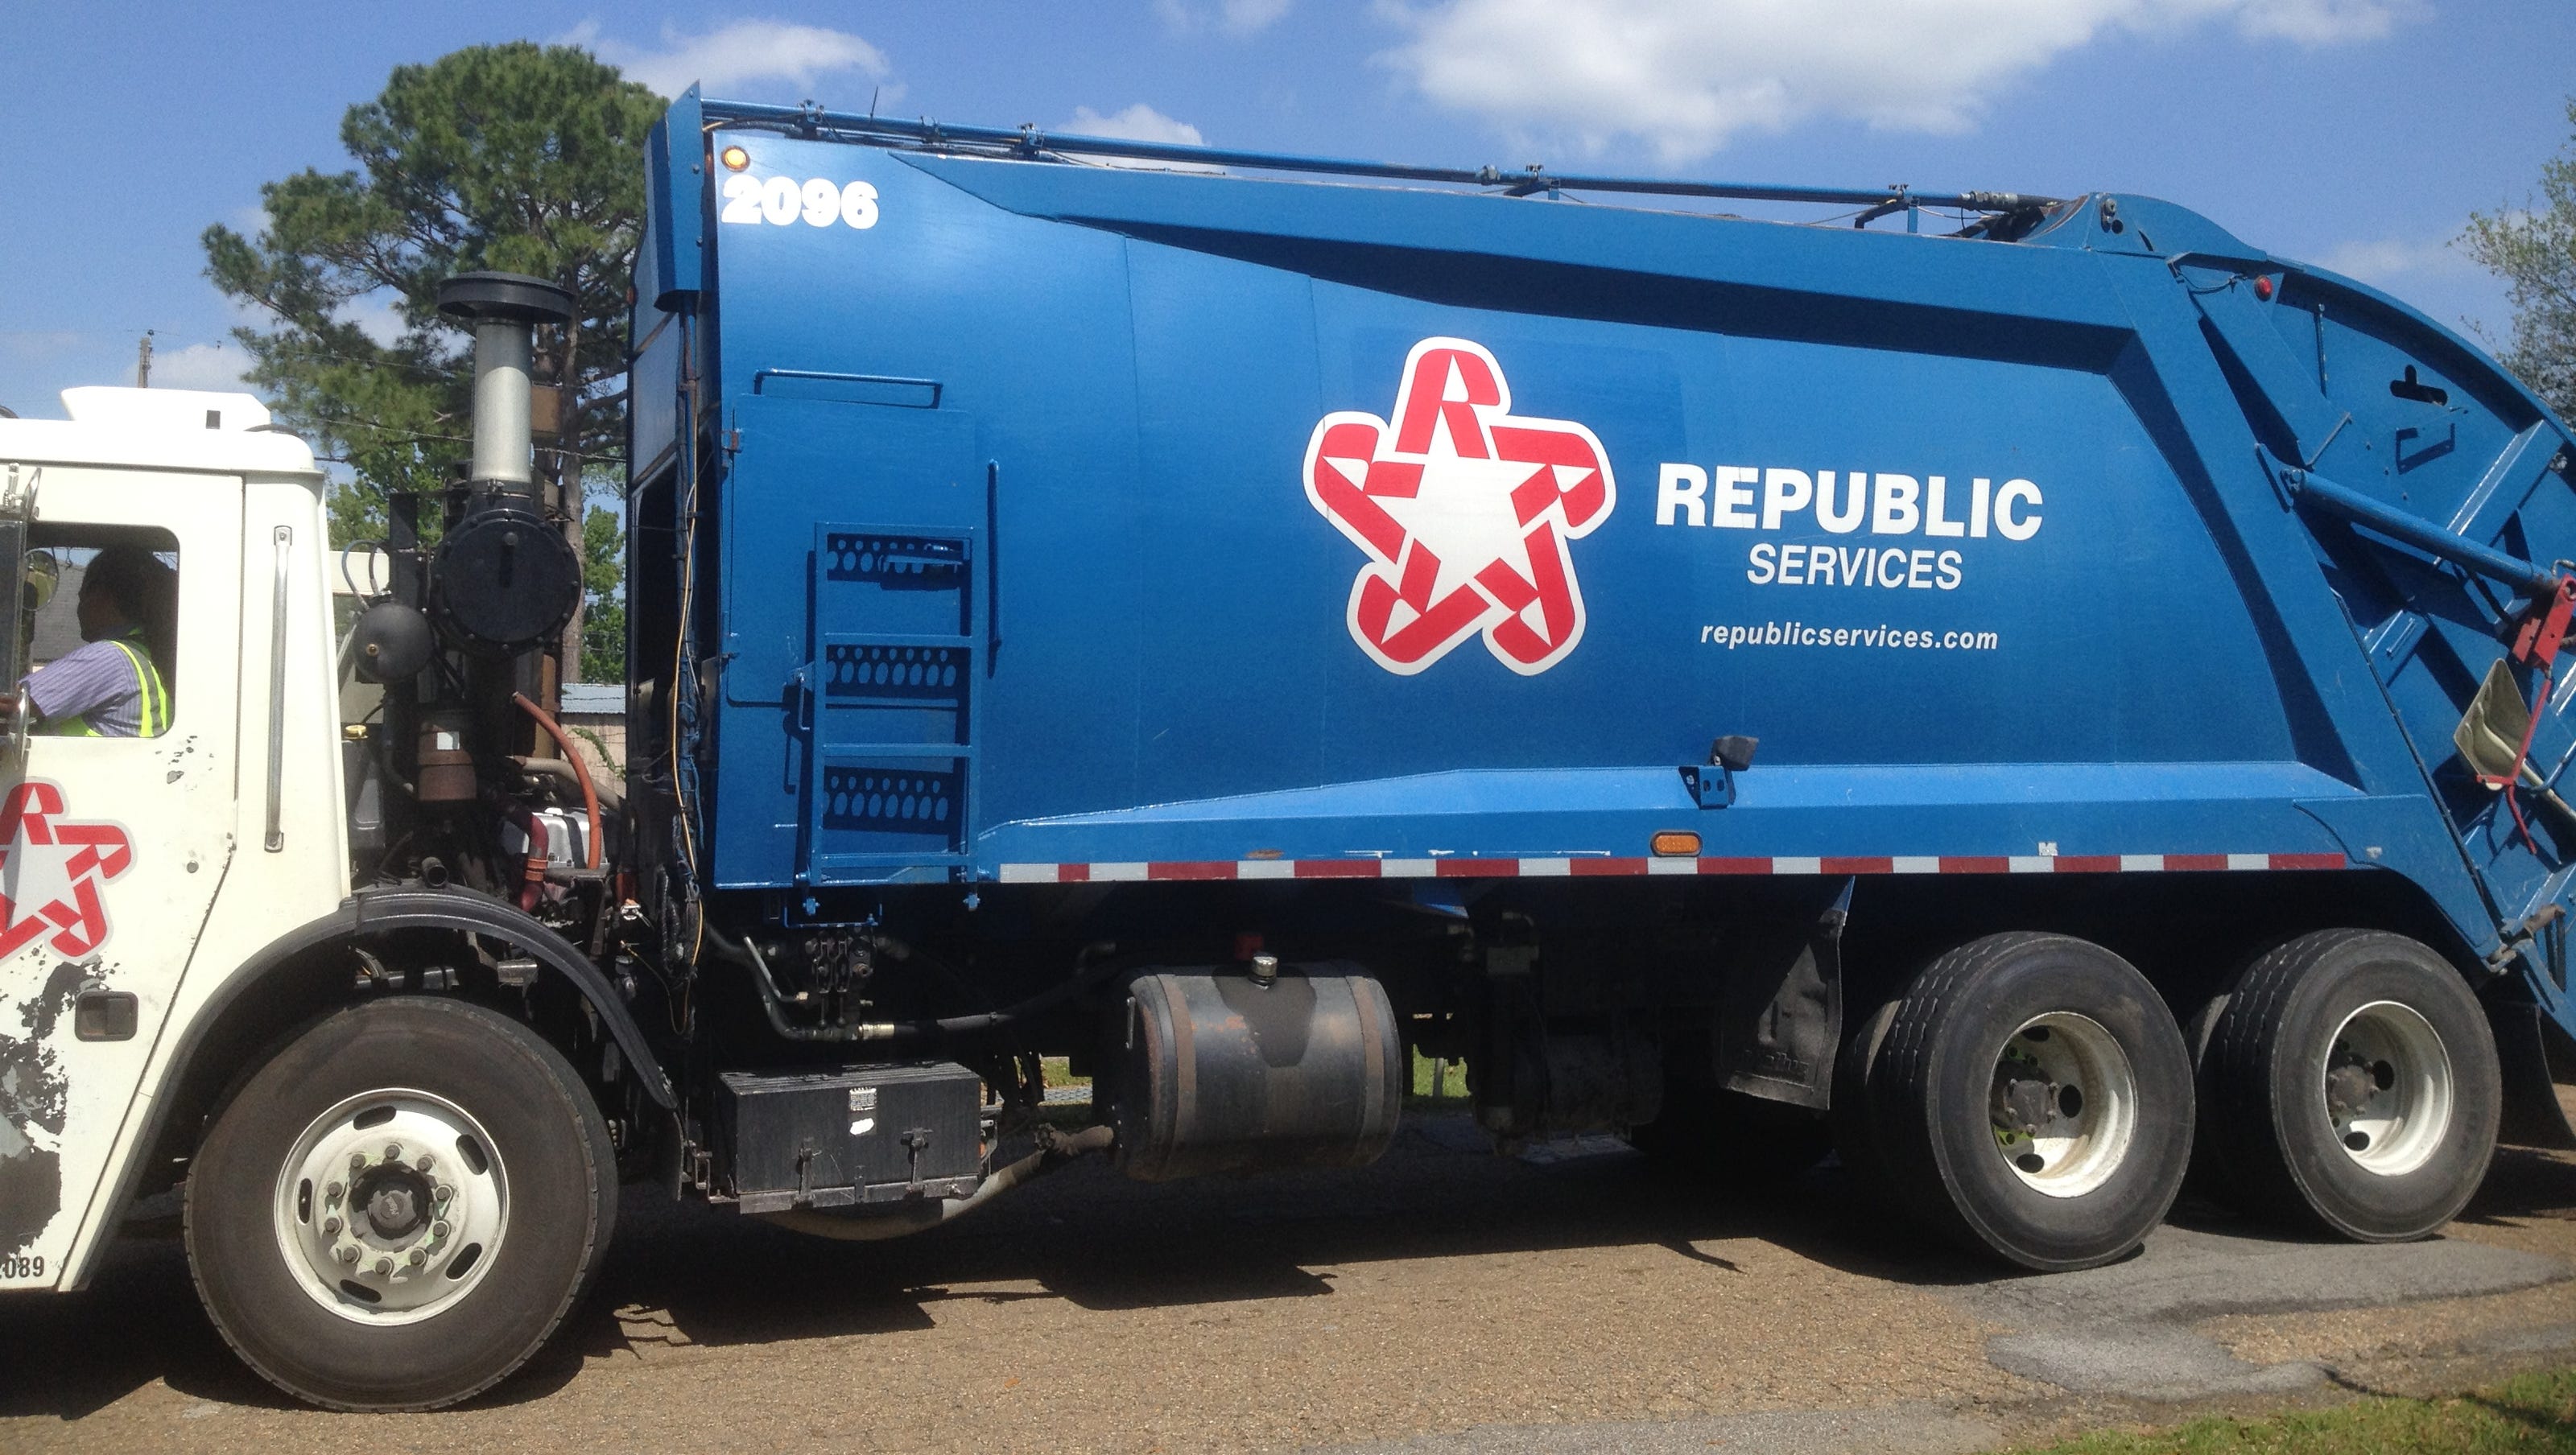 Republic Services apologizes for late garbage pickup